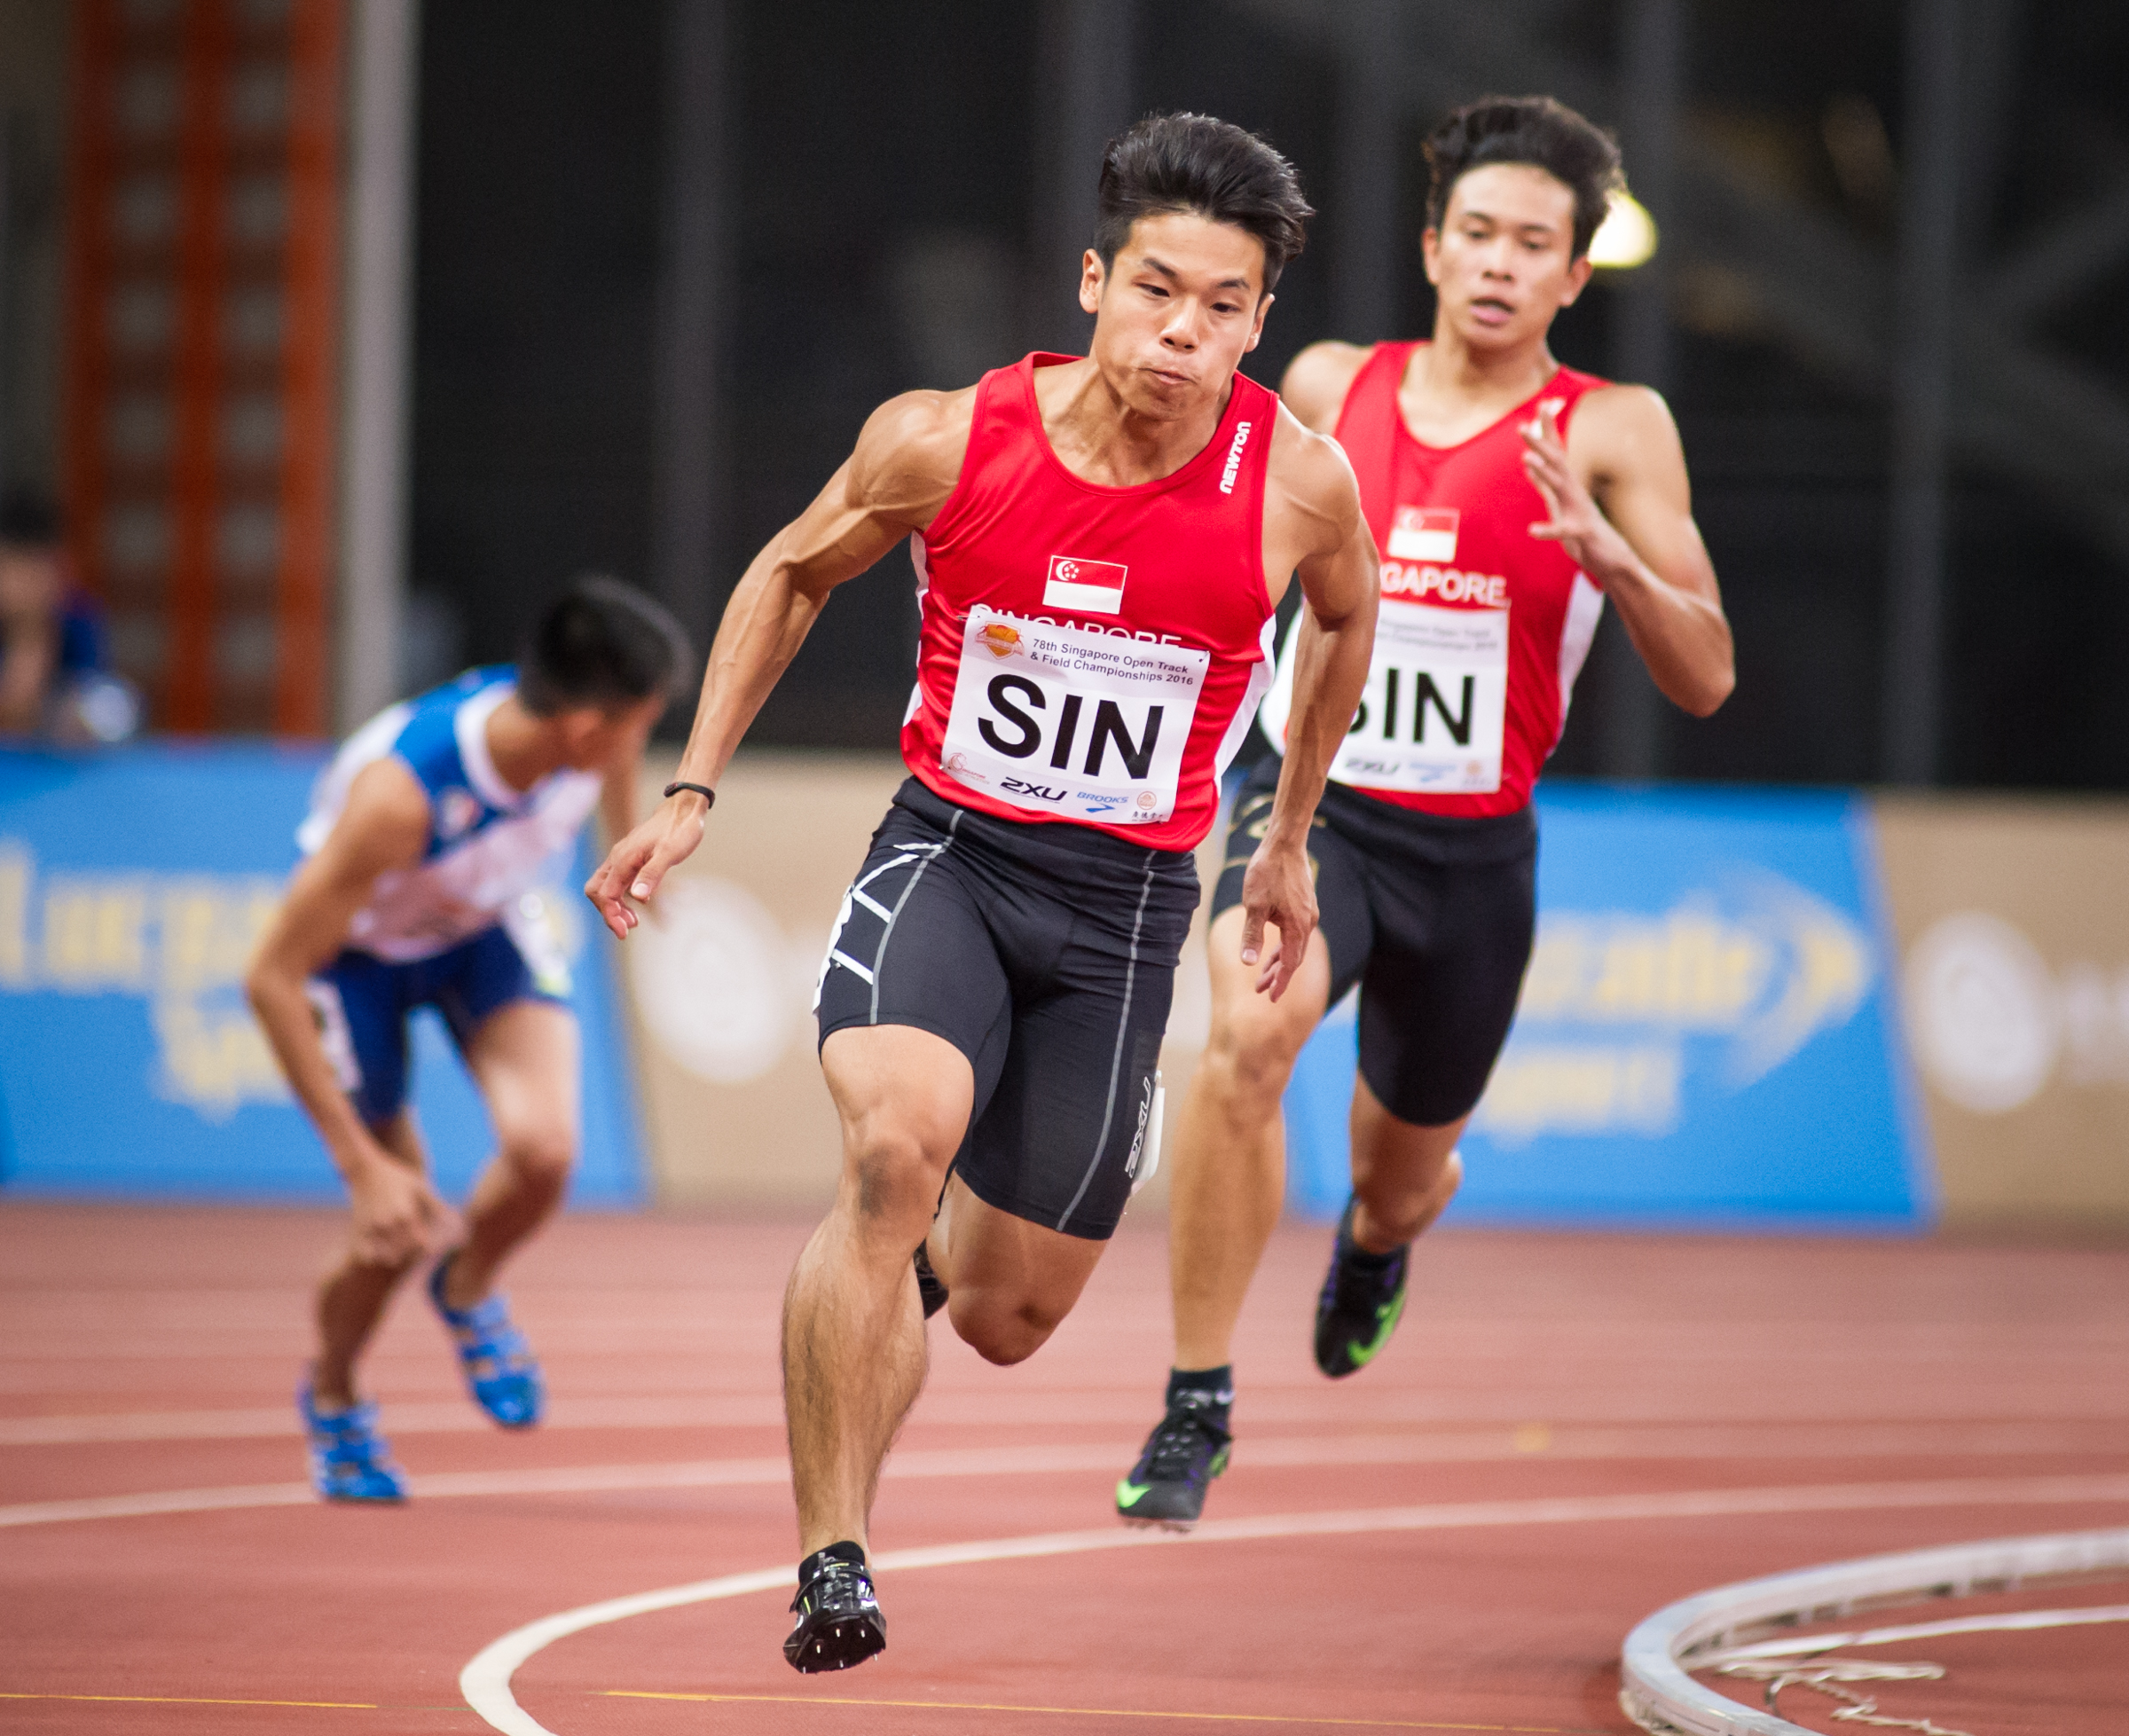 A Singaporean runner prepares to receive the baton during the Singapore Open Track and Field Championships held at the Singapore Sports Hub.